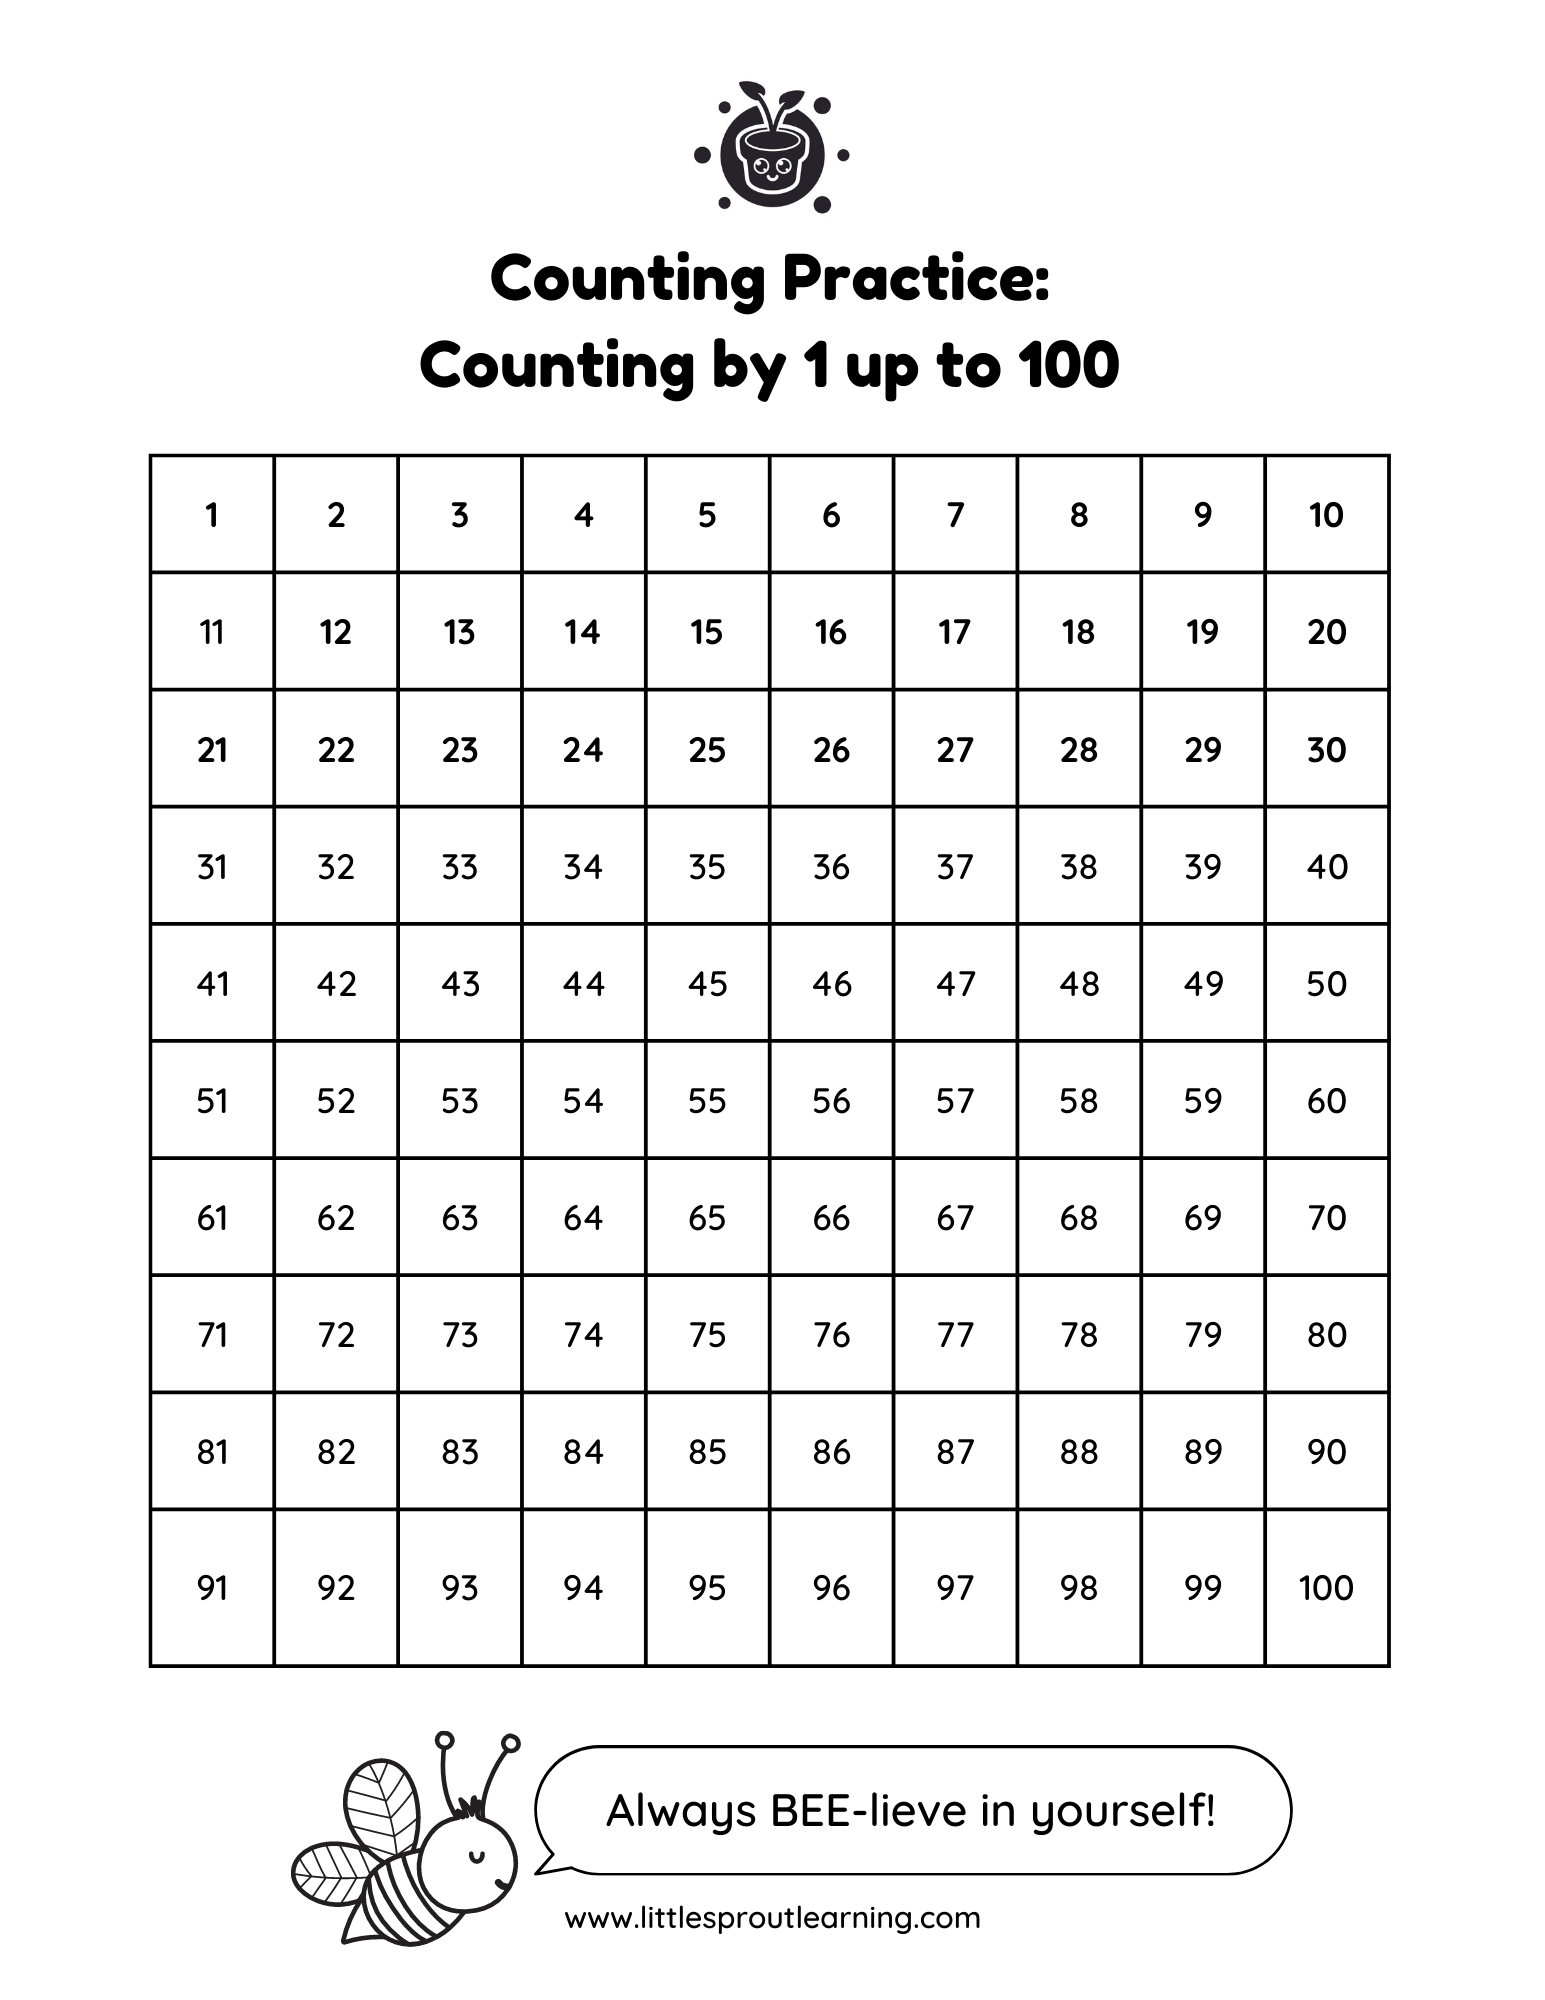 Counting Practice – Counting Chart up to 100 by 1